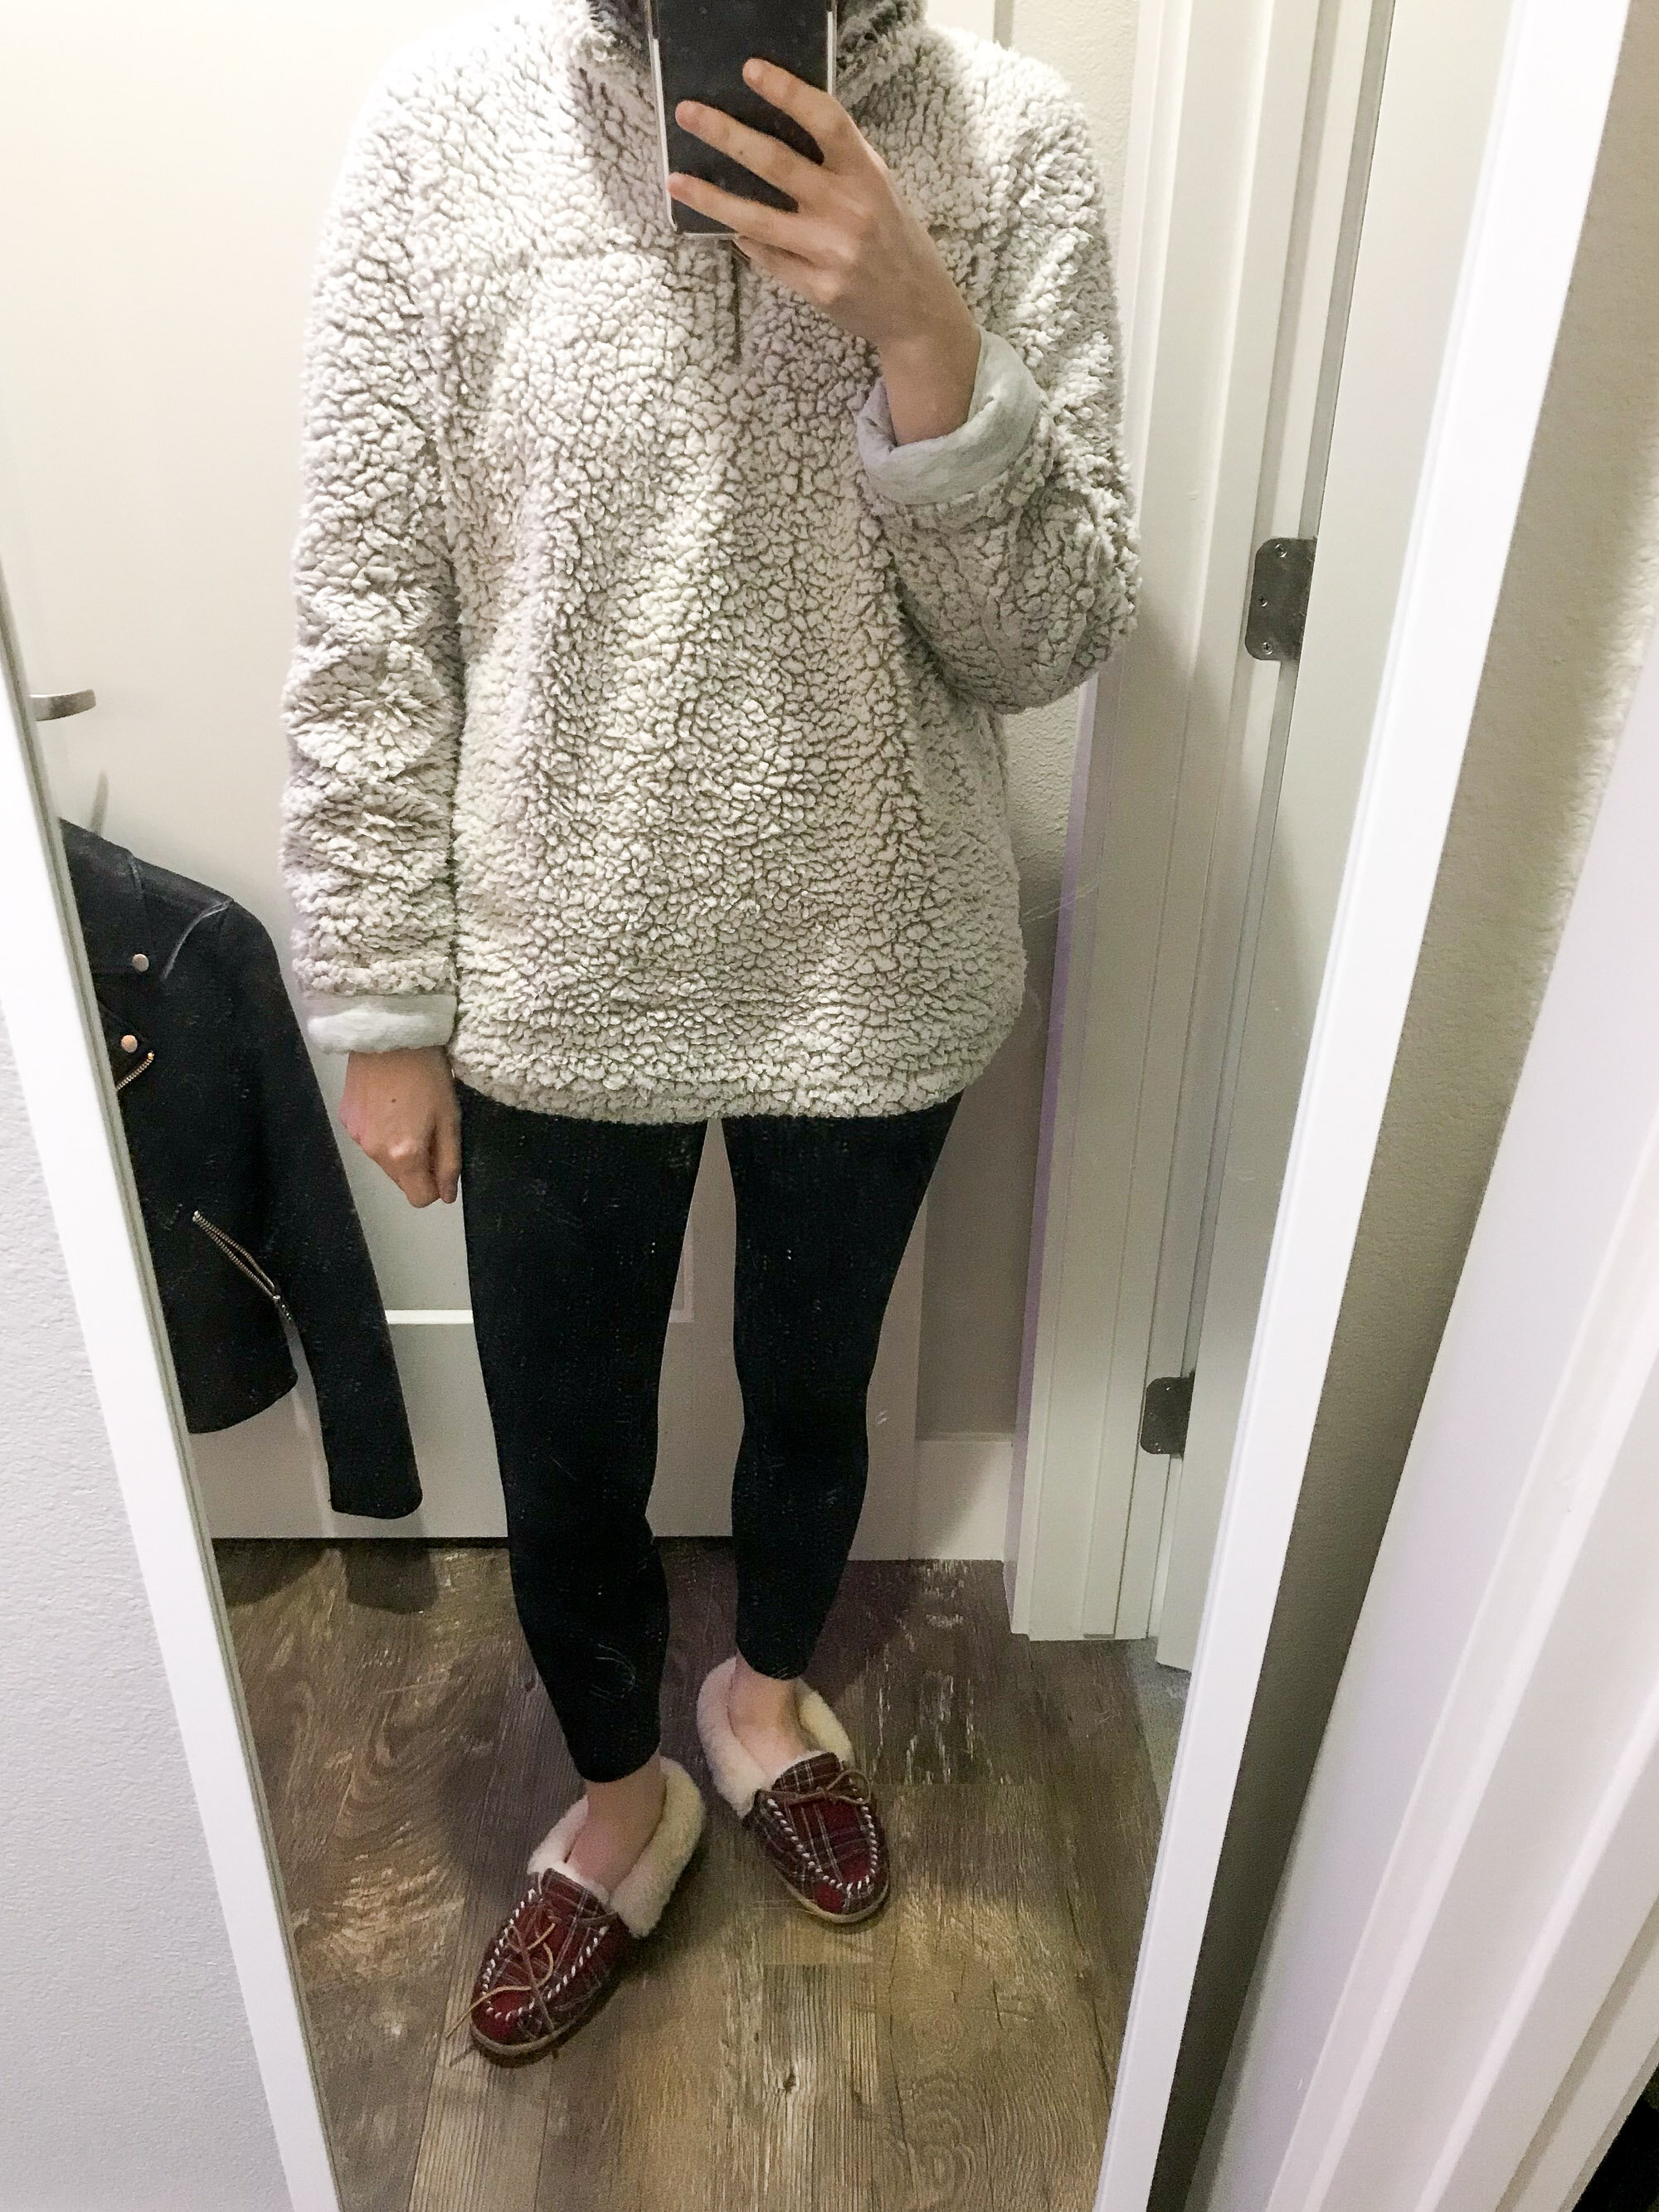 Work from home outfit: wubby pullover + leggings — Cotton Cashmere Cat Hair